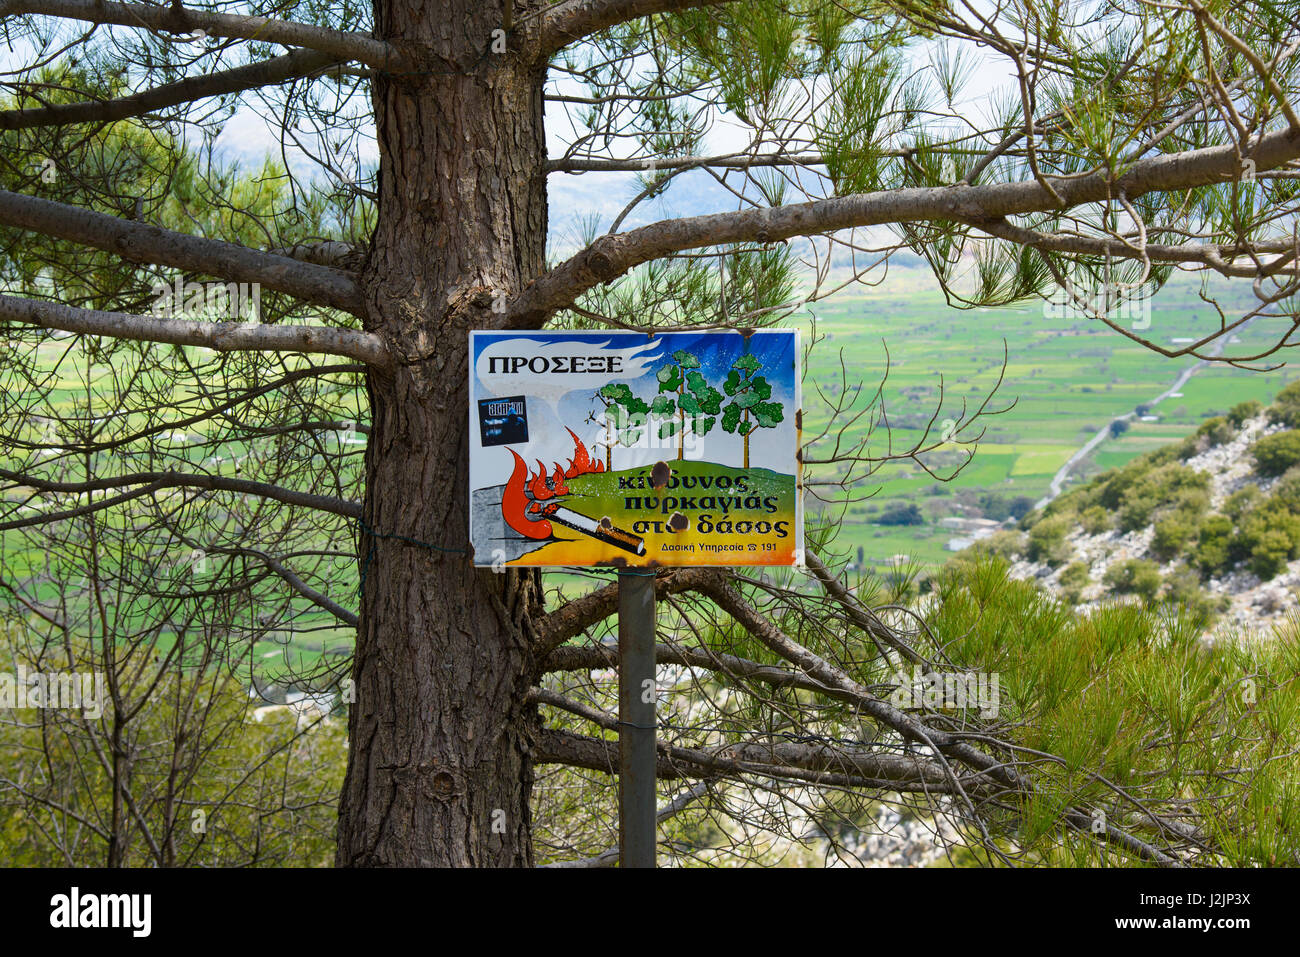 A forestry No smoking sign on a tree, Lasithi Plateau, Crete, Greece. Stock Photo